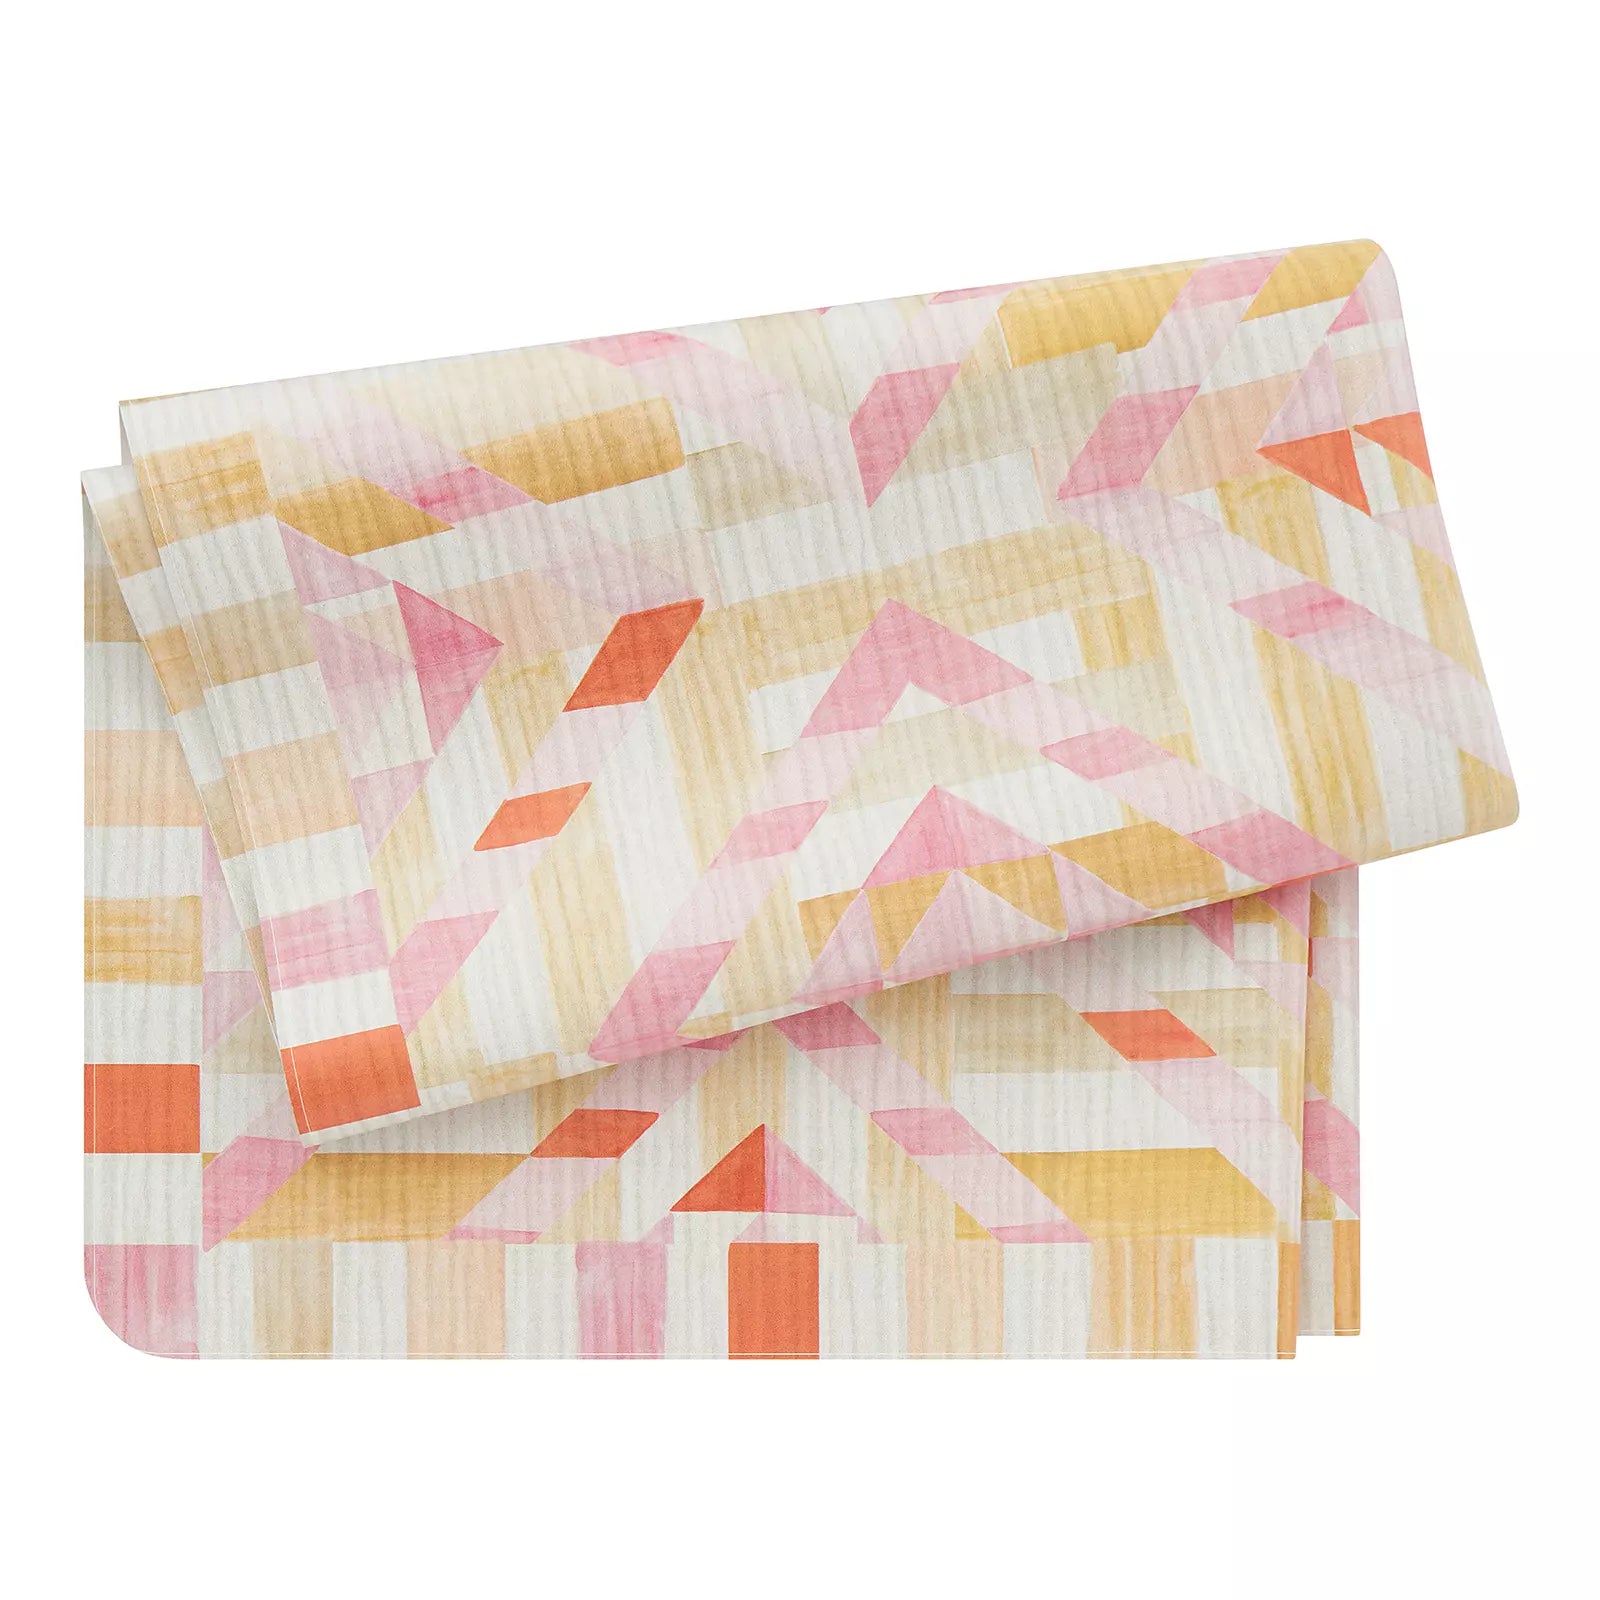 Freya sunshine portable play mat in a orange yellow and pink quilt print shown folded in 4s